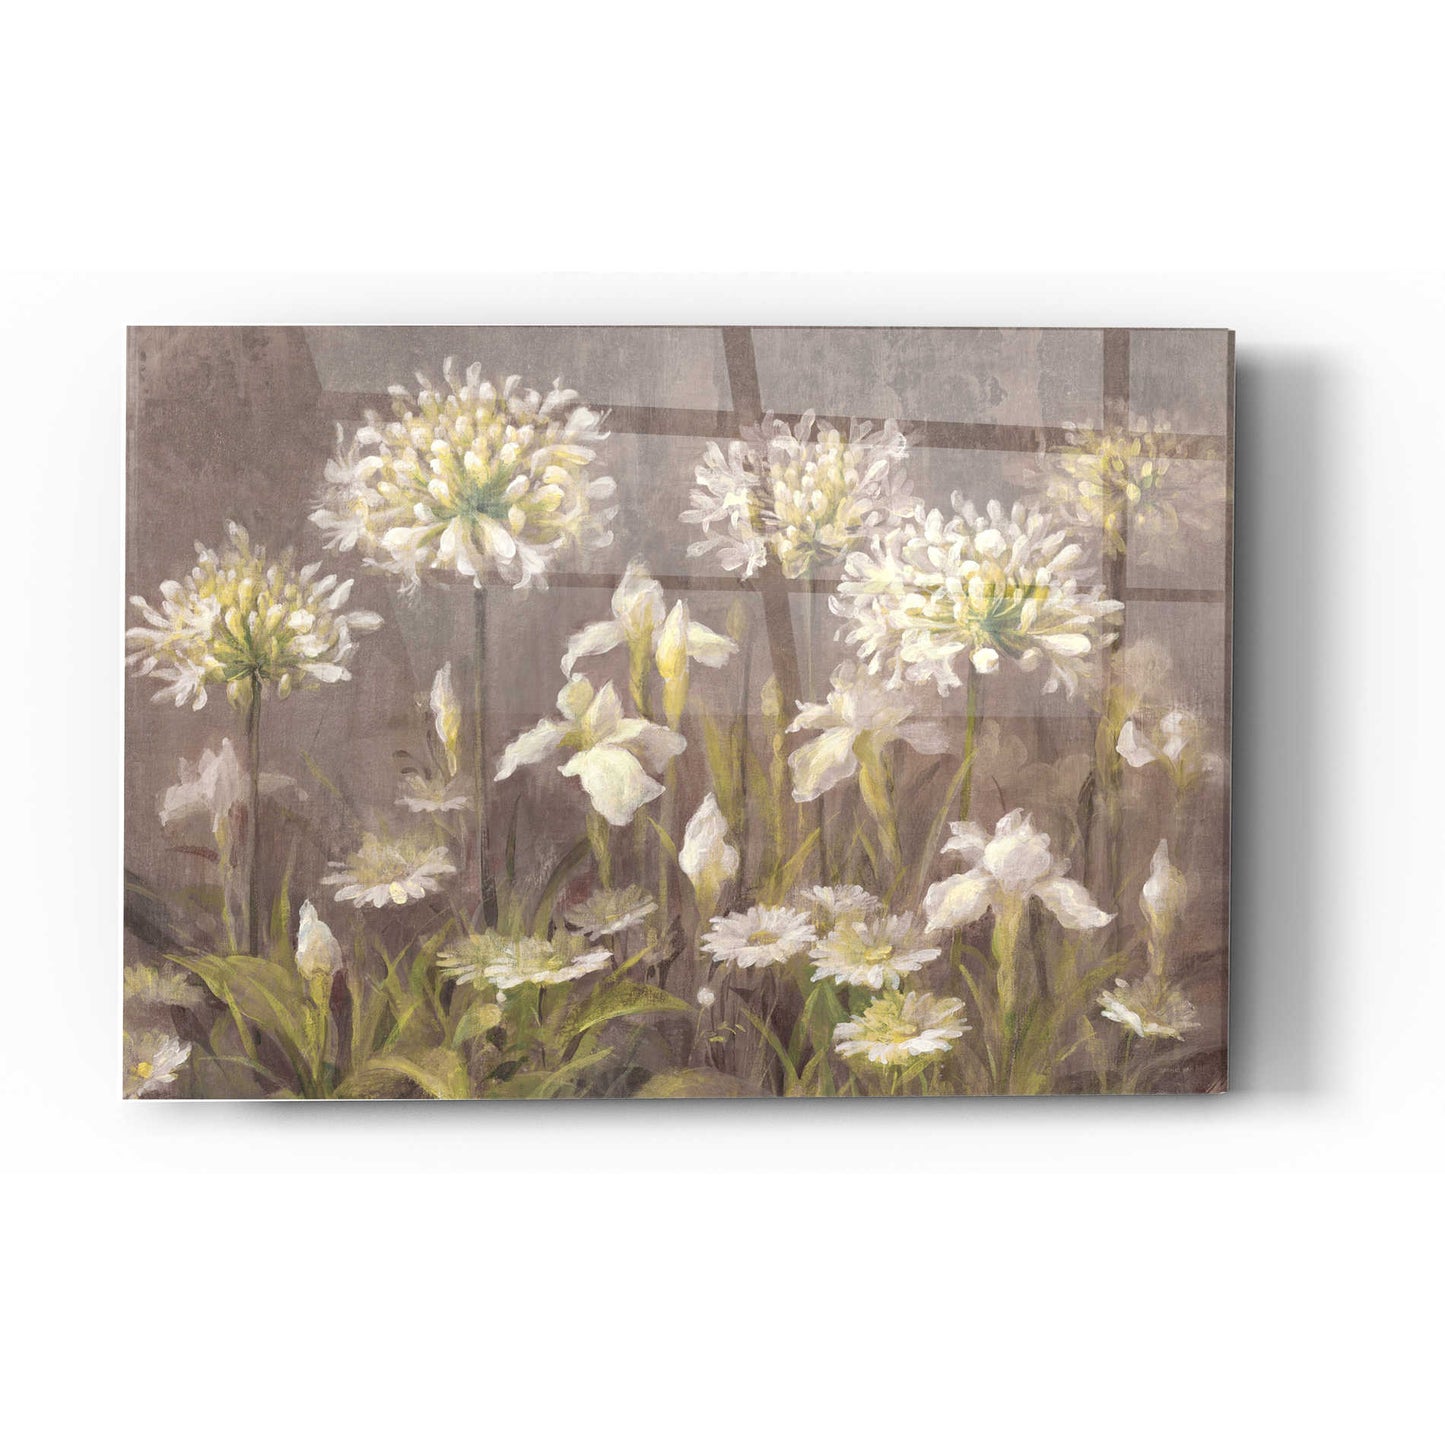 Epic Art 'Spring Blossoms Neutral' by Danhui Nai, Acrylic Glass Wall Art,12 x 16